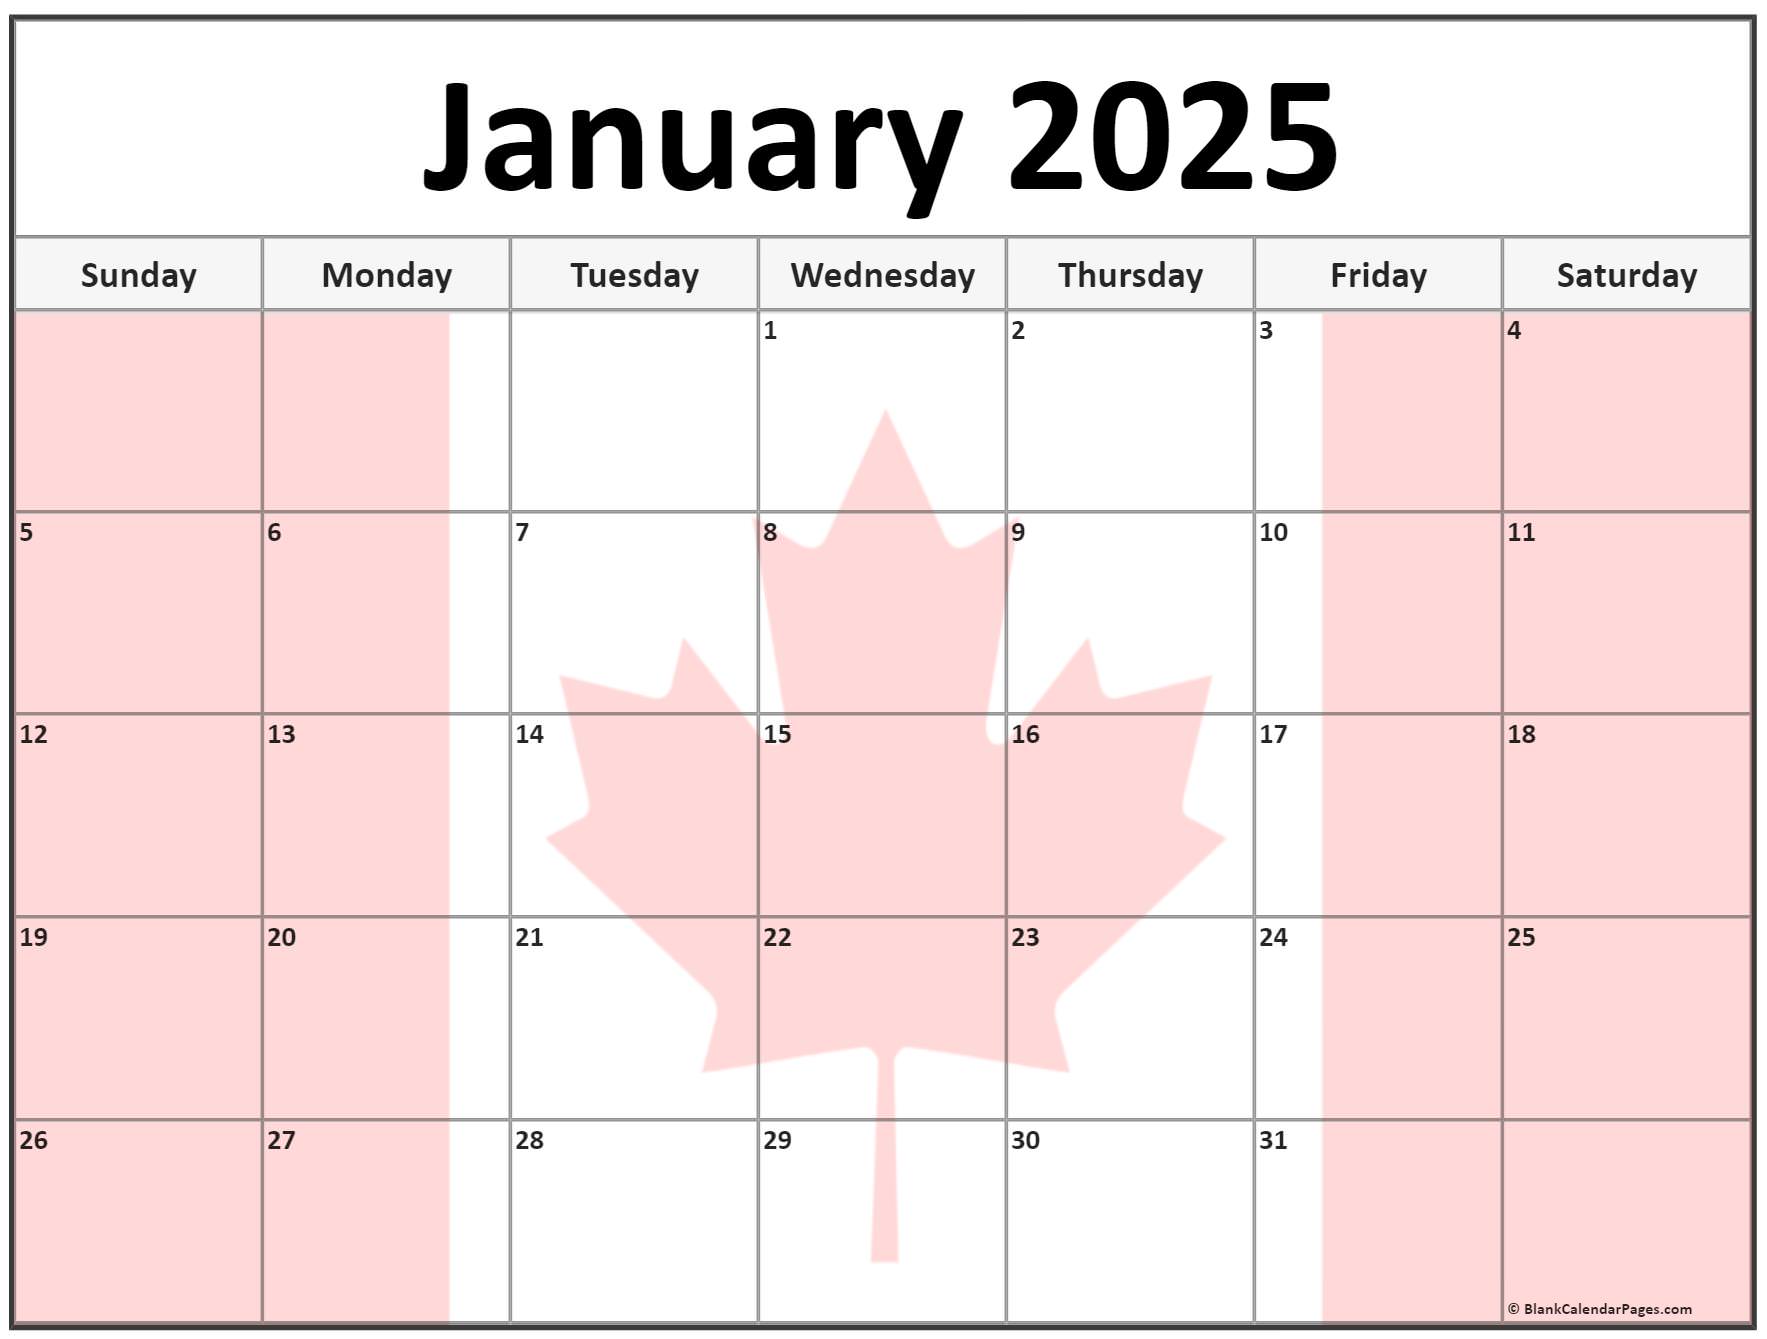 Collection of January 2025 photo calendars with image filters.